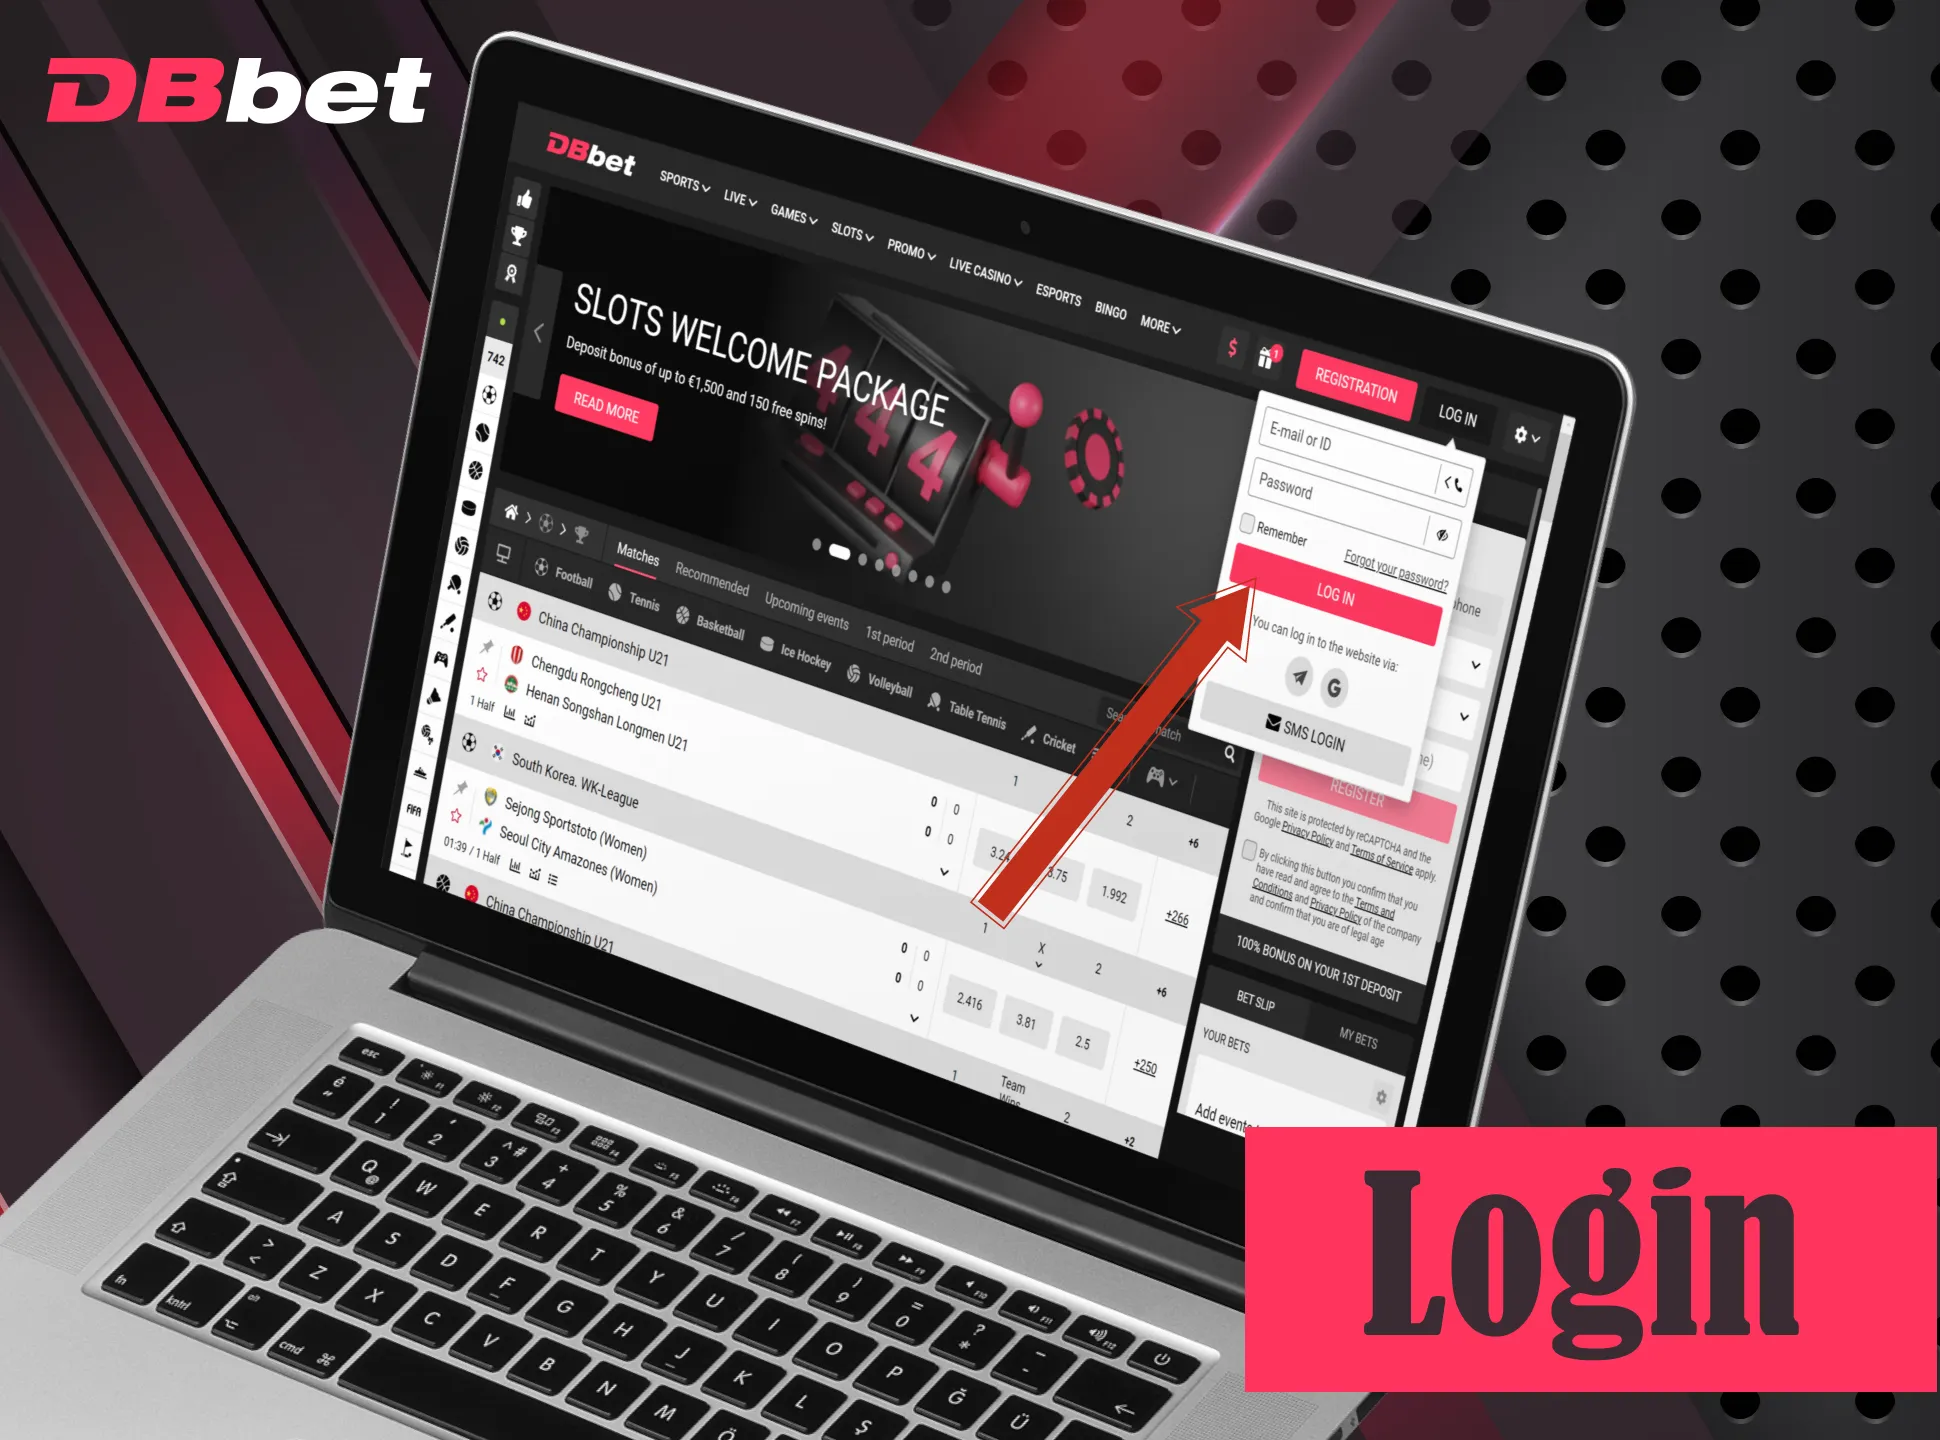 Log in on DBbet website using your account data.